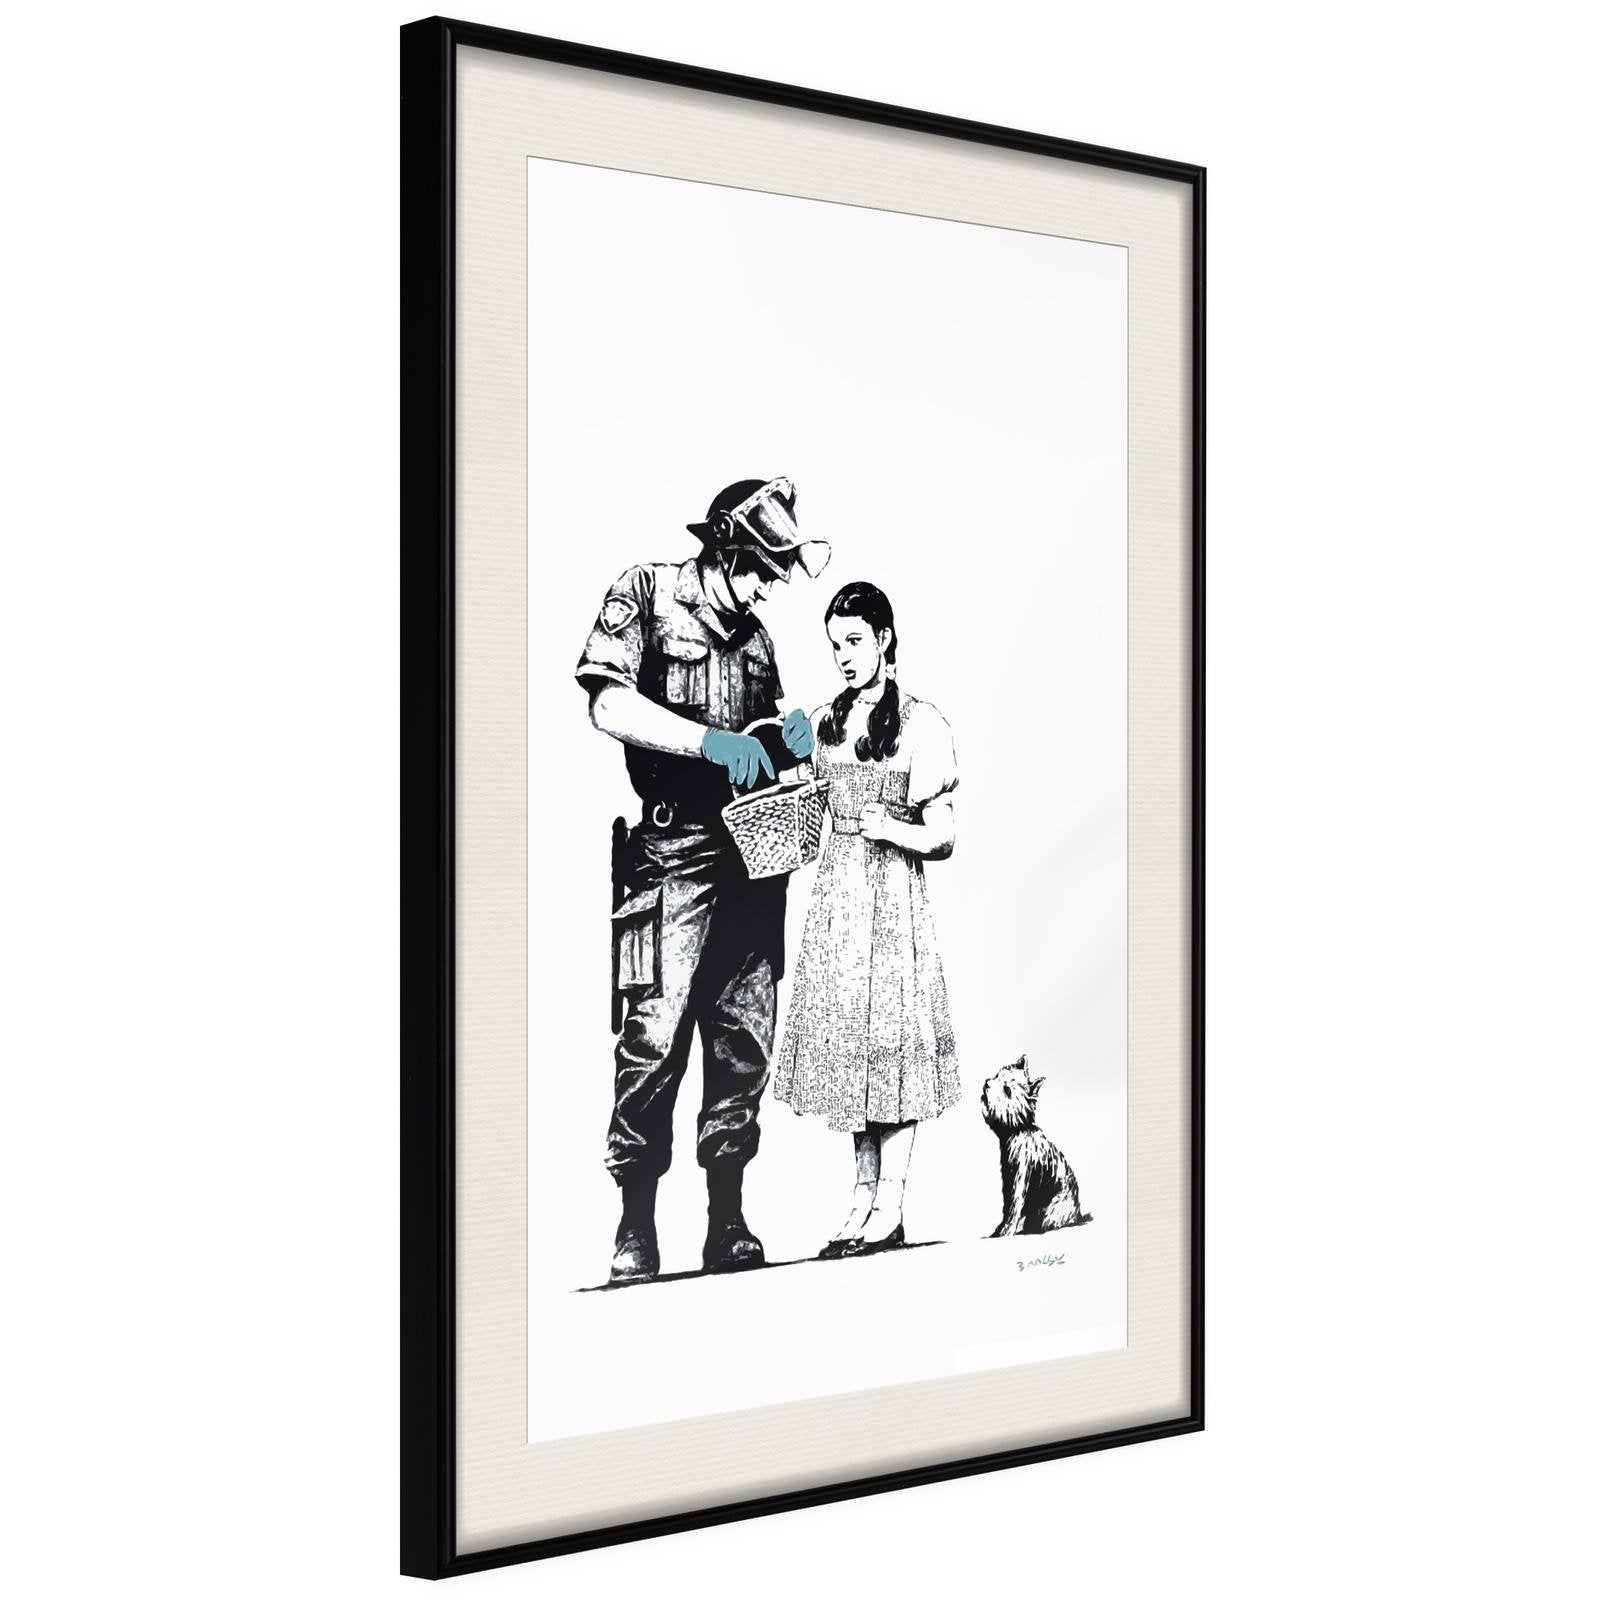 Inramad Poster / Tavla - Banksy: Stop and Search-Poster Inramad-Artgeist-20x30-Svart ram med passepartout-peaceofhome.se